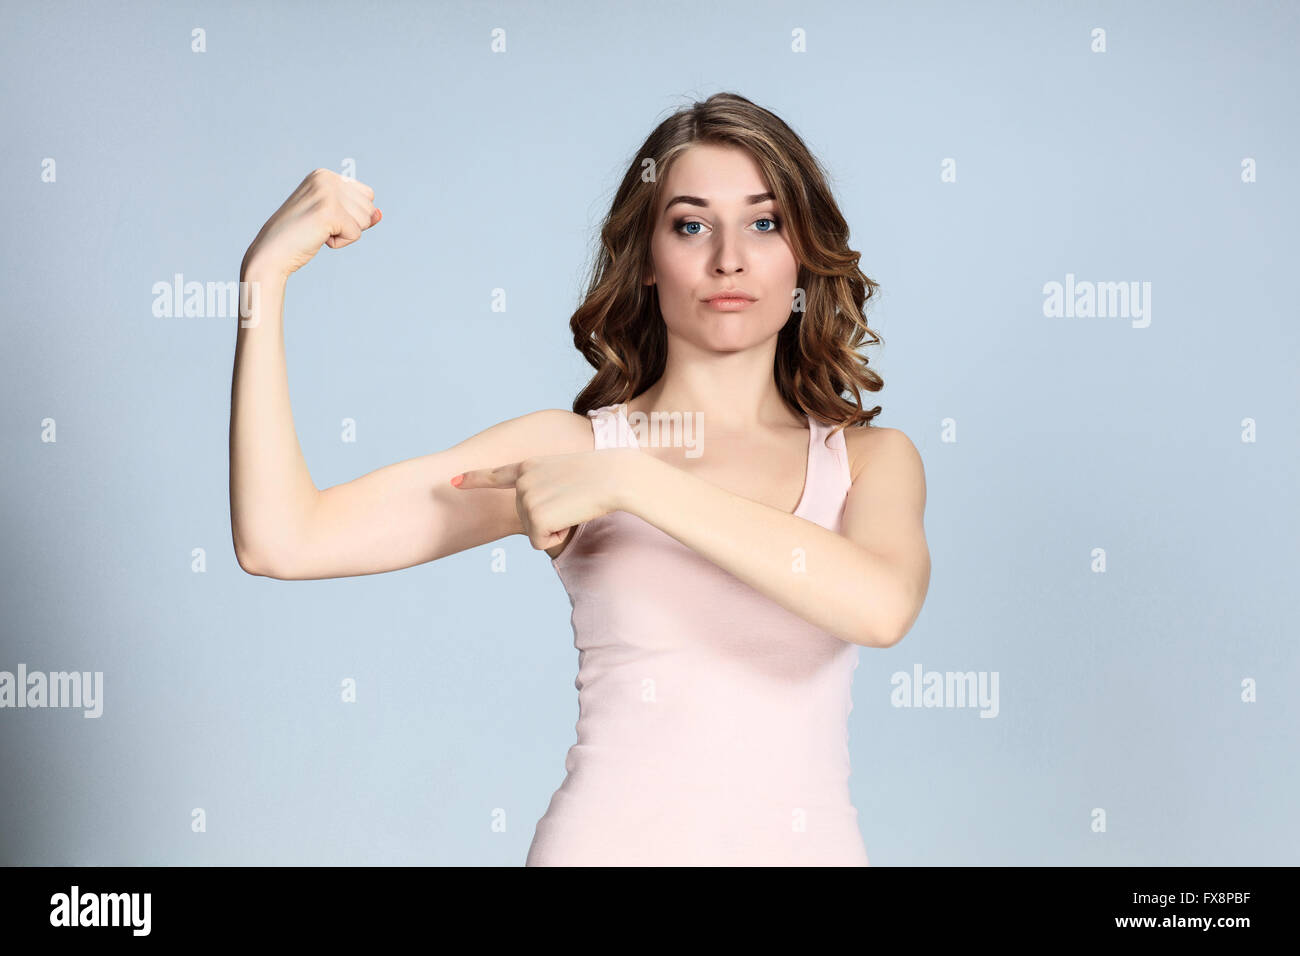 The young woman showing her muscles on gray background. Stock Photo